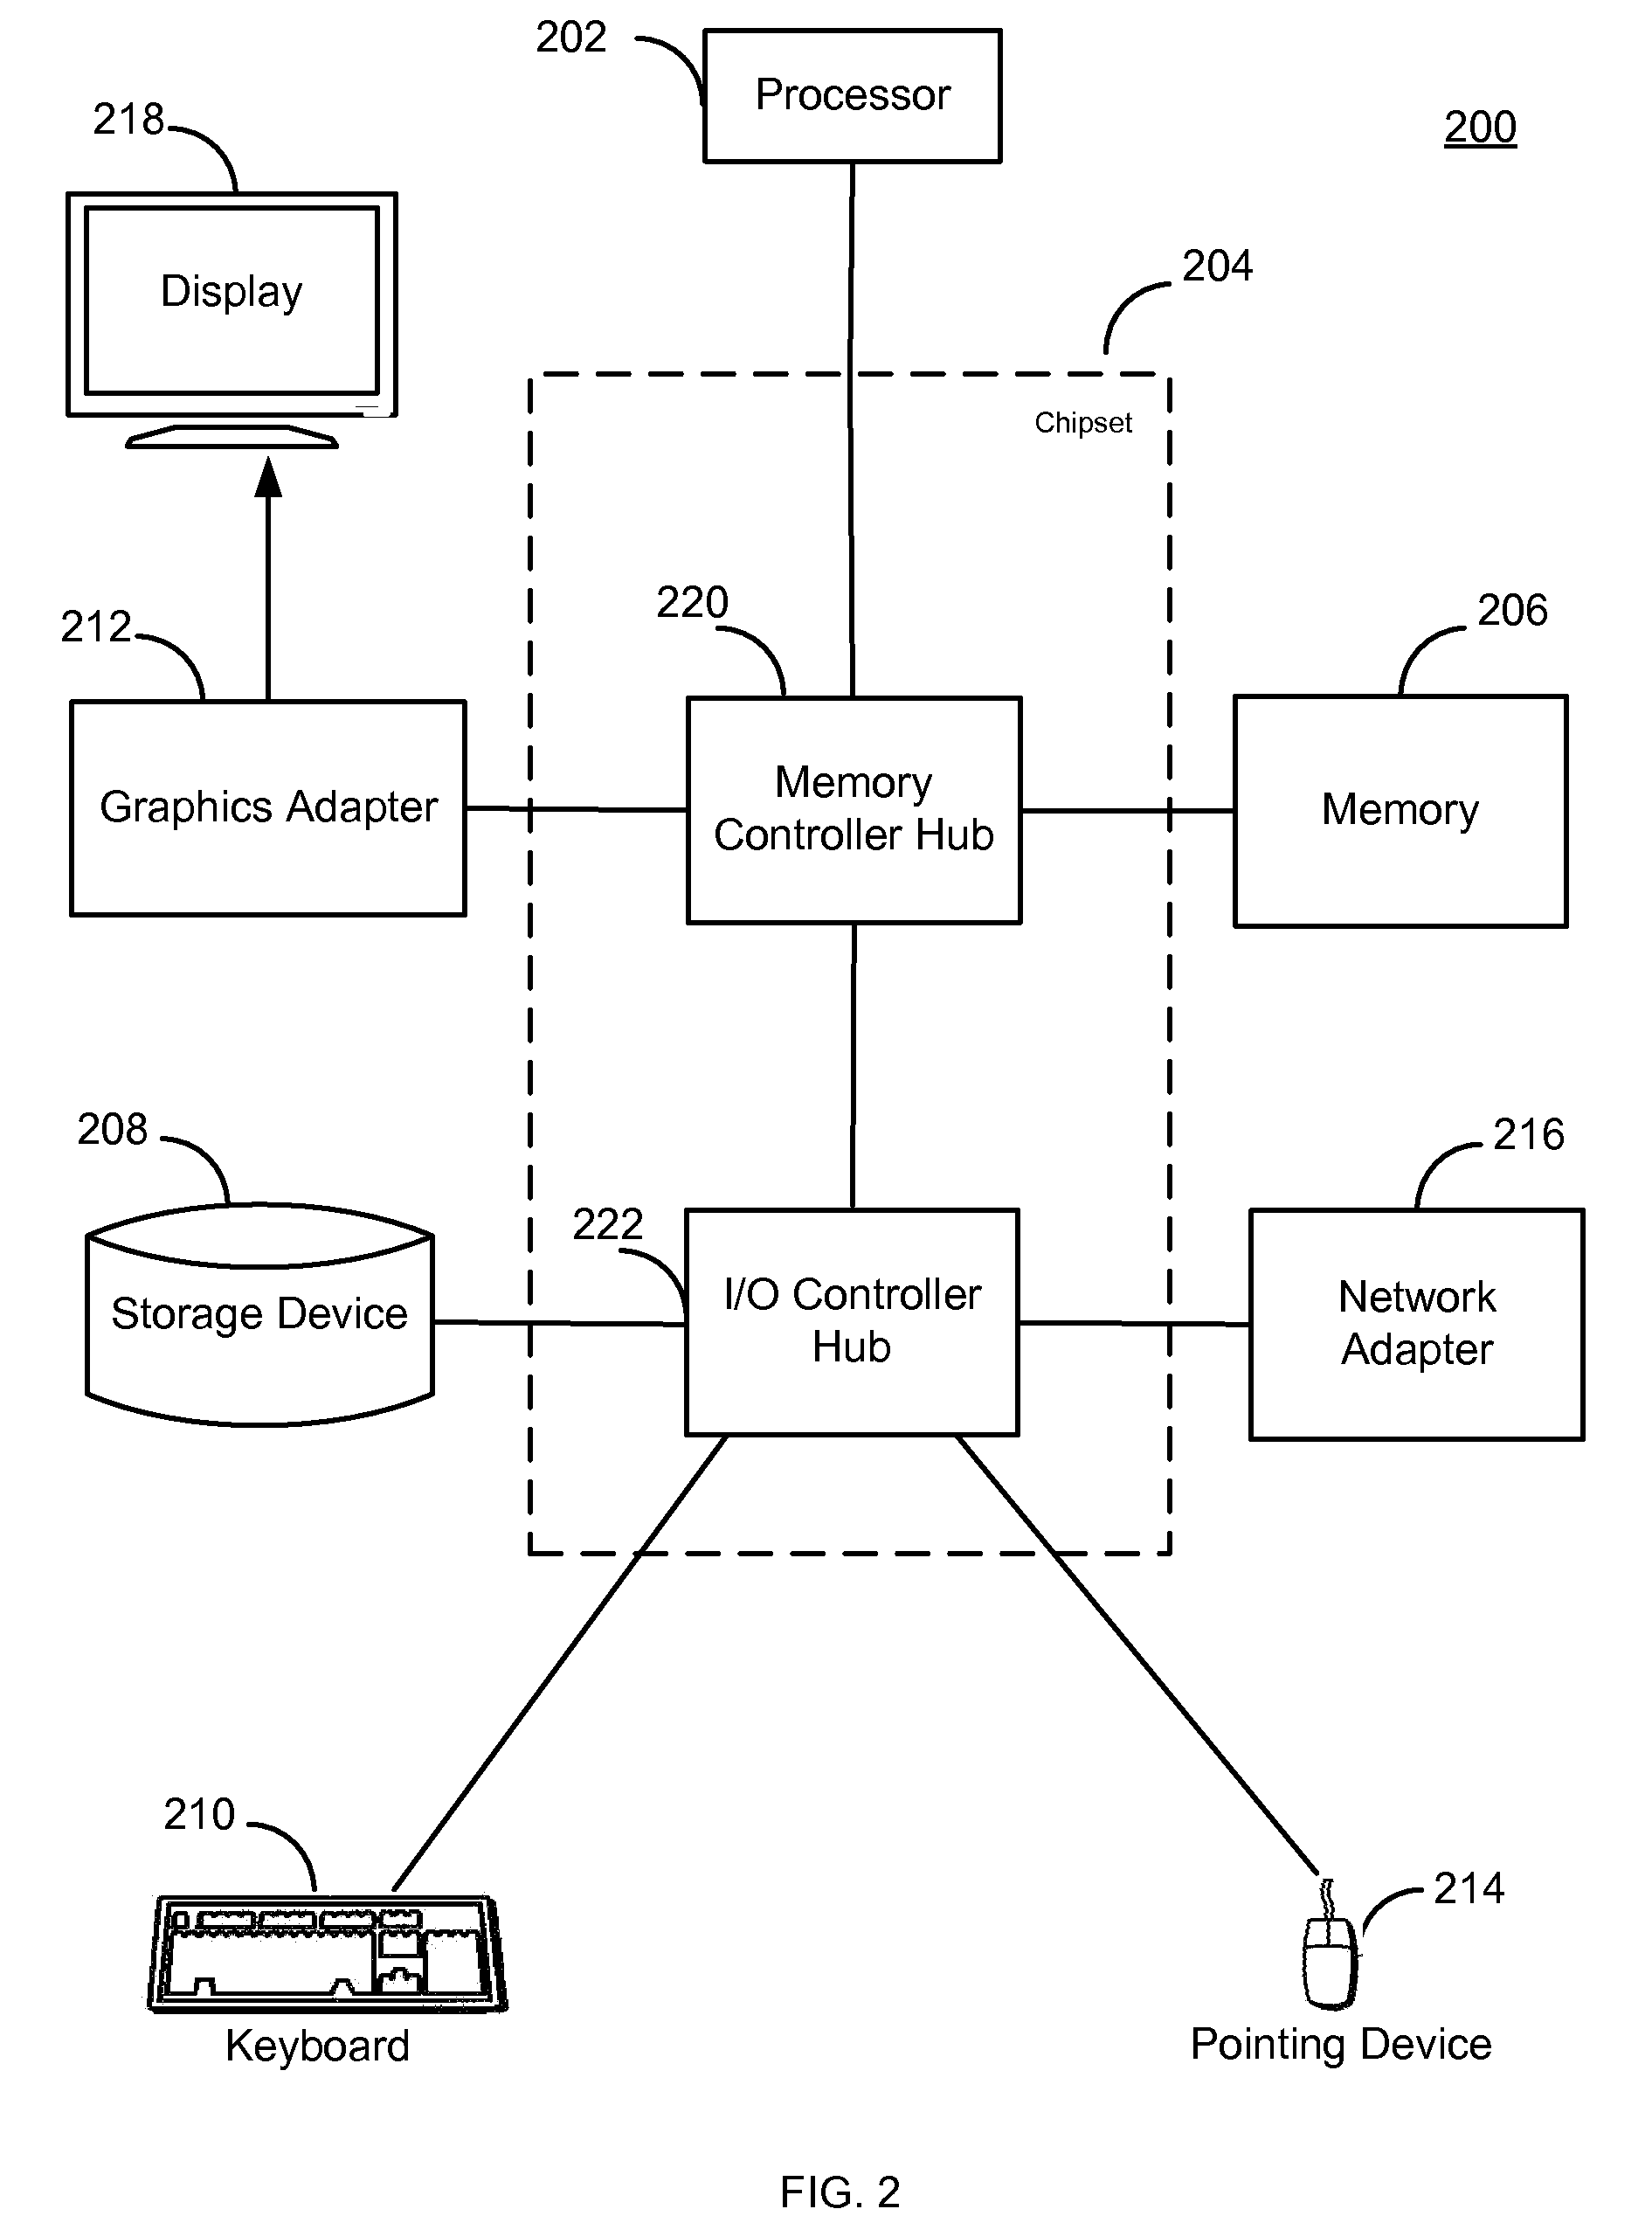 Label propagation in a distributed system